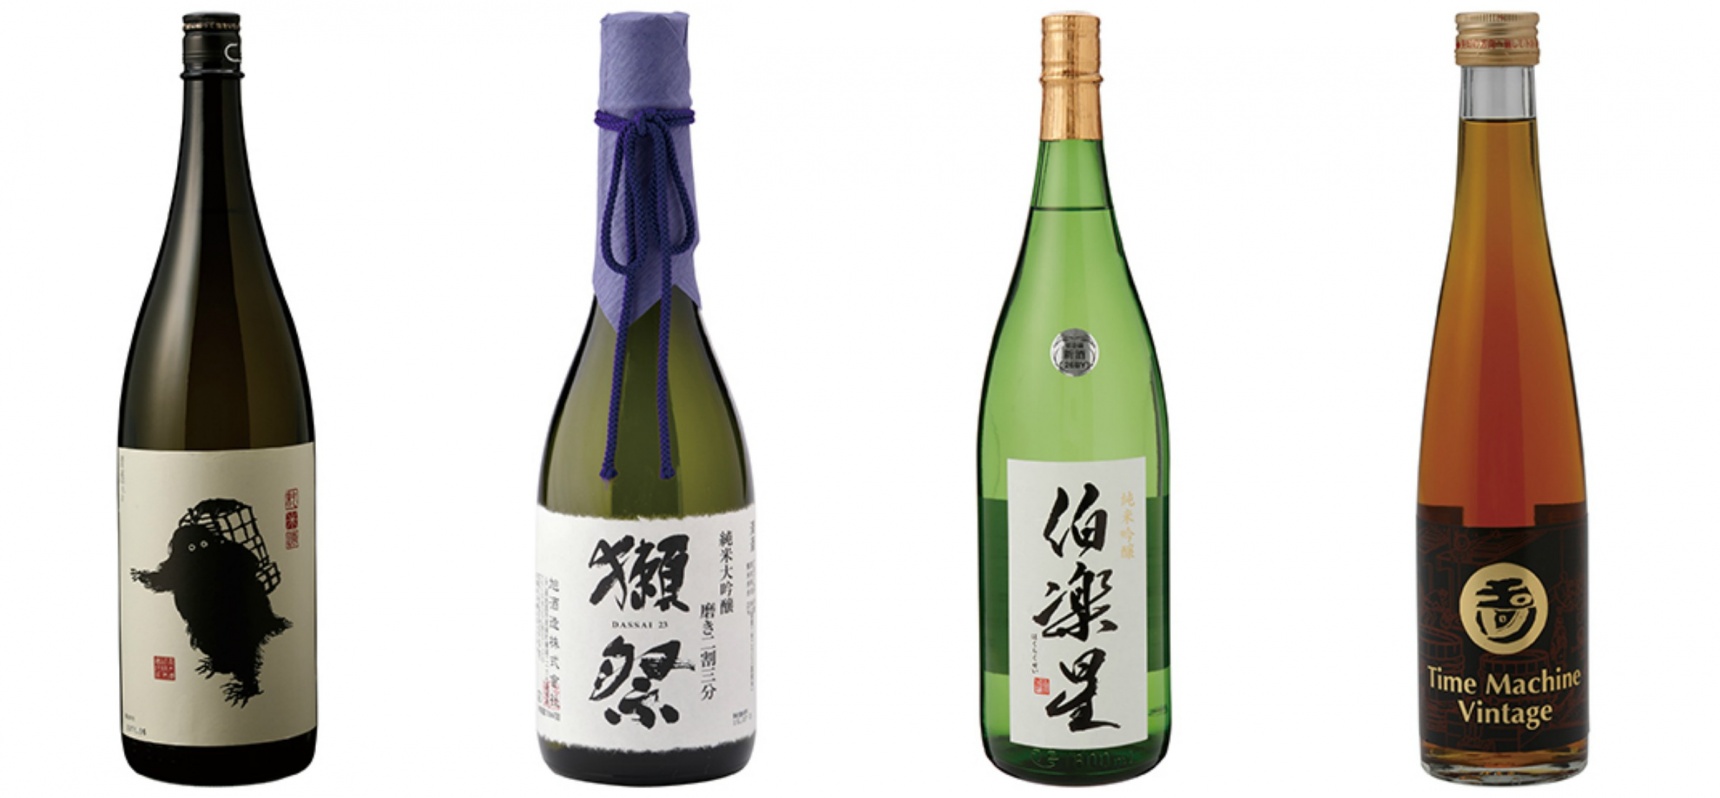 A Great Selection of Sake from Across Japan